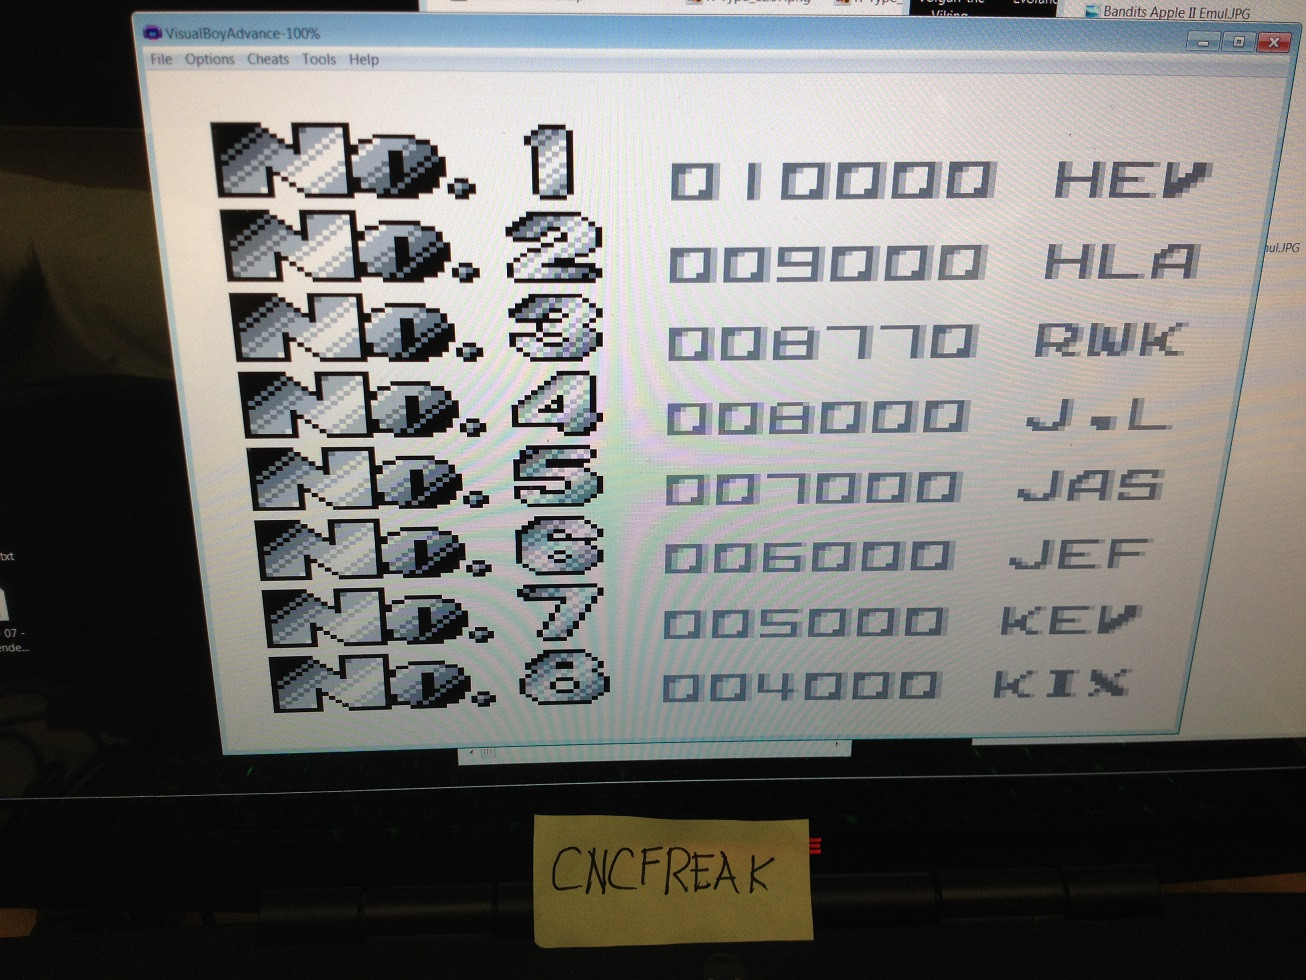 cncfreak: R-Type (Game Boy Emulated) 8,770 points on 2013-10-07 23:03:21